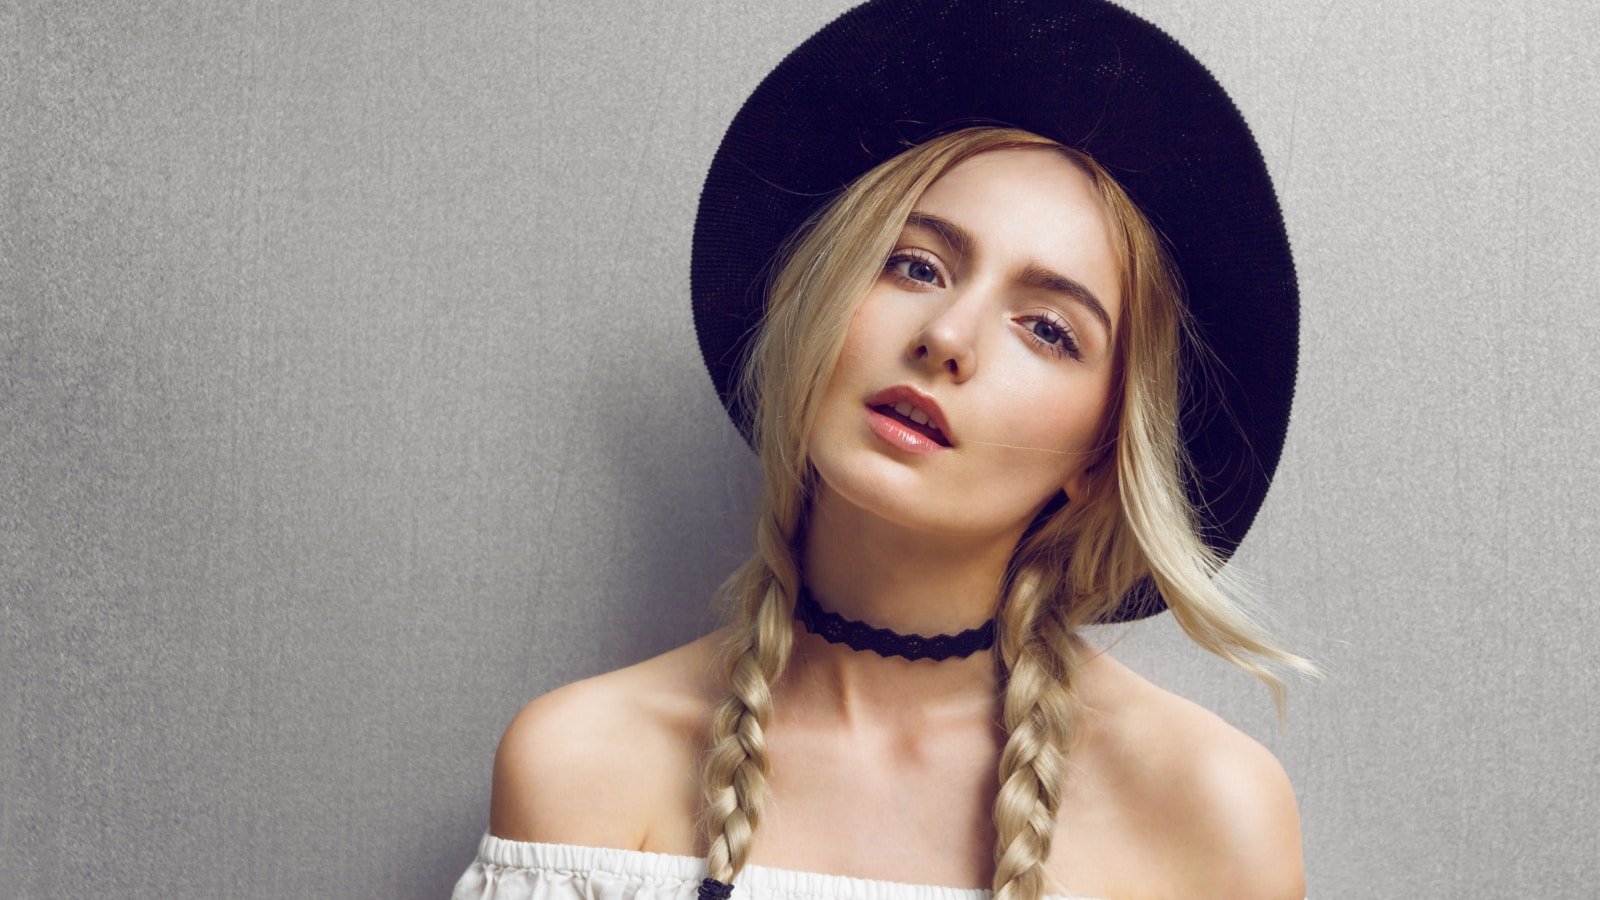 Pigtails. Close up of beautiful young blonde woman with black hat. Her hair is tied in two big ponytails. Around neck she has black choker. Professional make-up, hair style and styling.